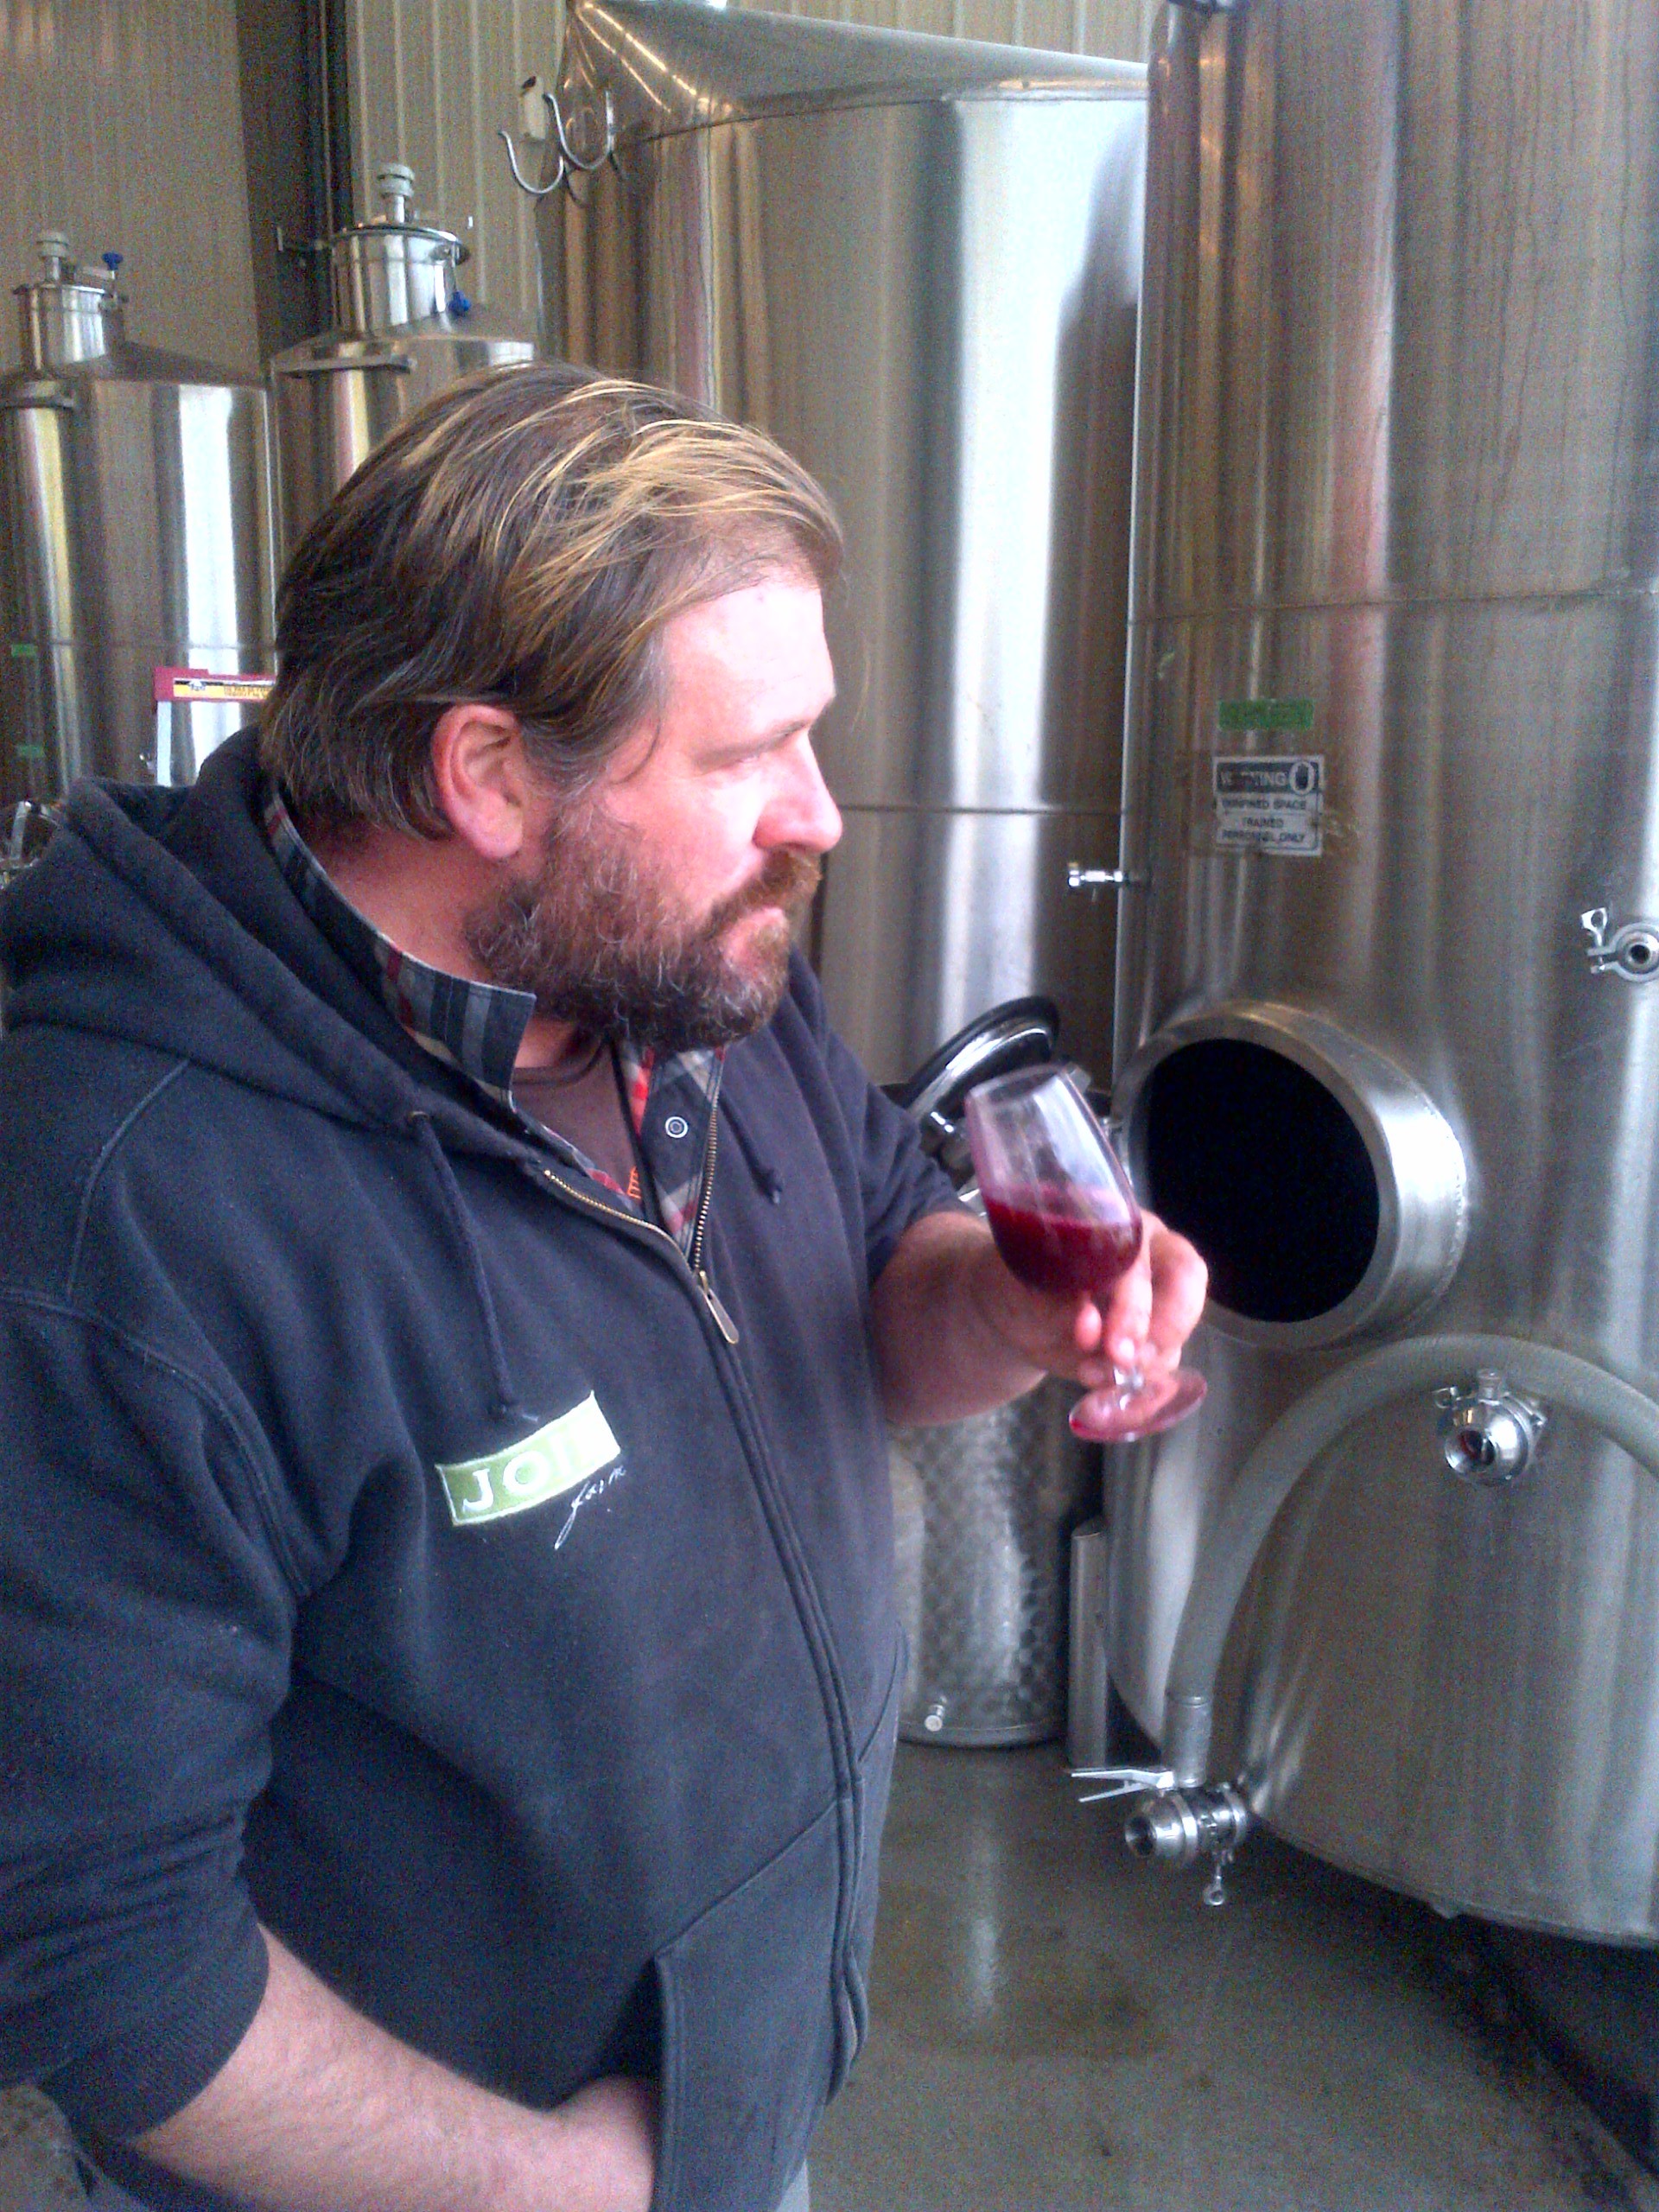  Vineyard manager Robert Thielicke trying out the fresh Gamay juice...  